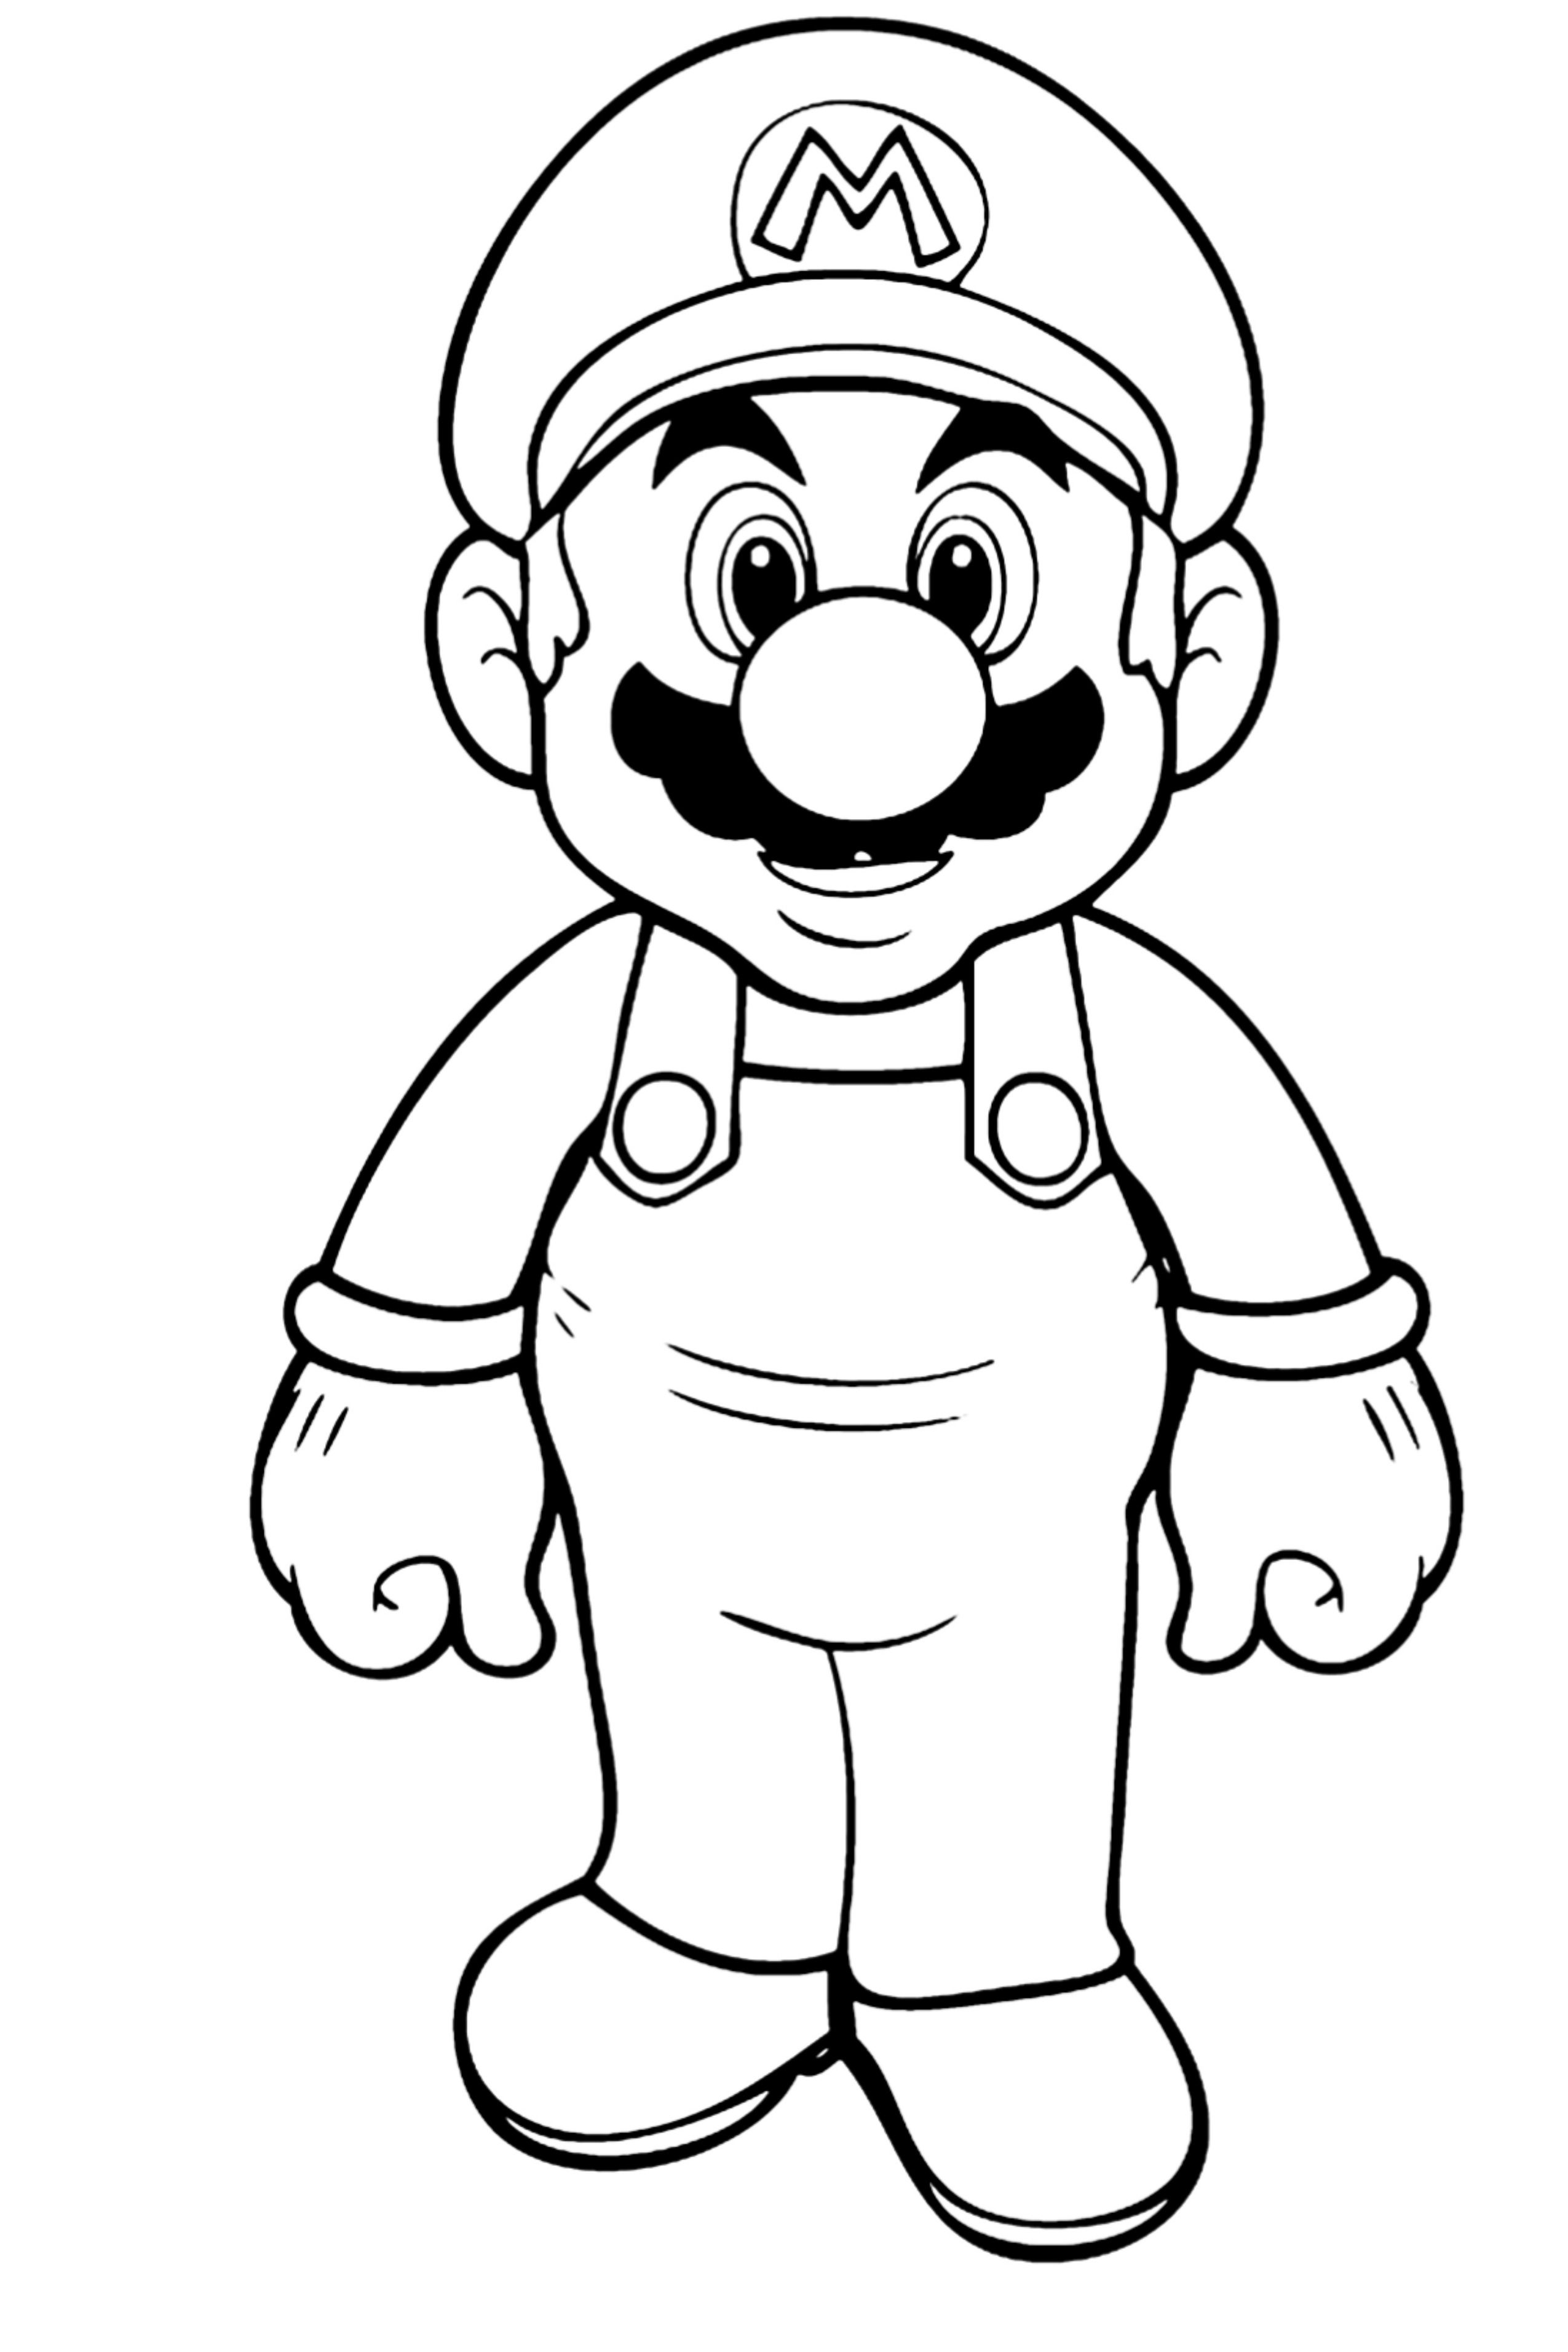 Super Mario Coloring Pages: 123 Adventures to Bring to Life with Color 1